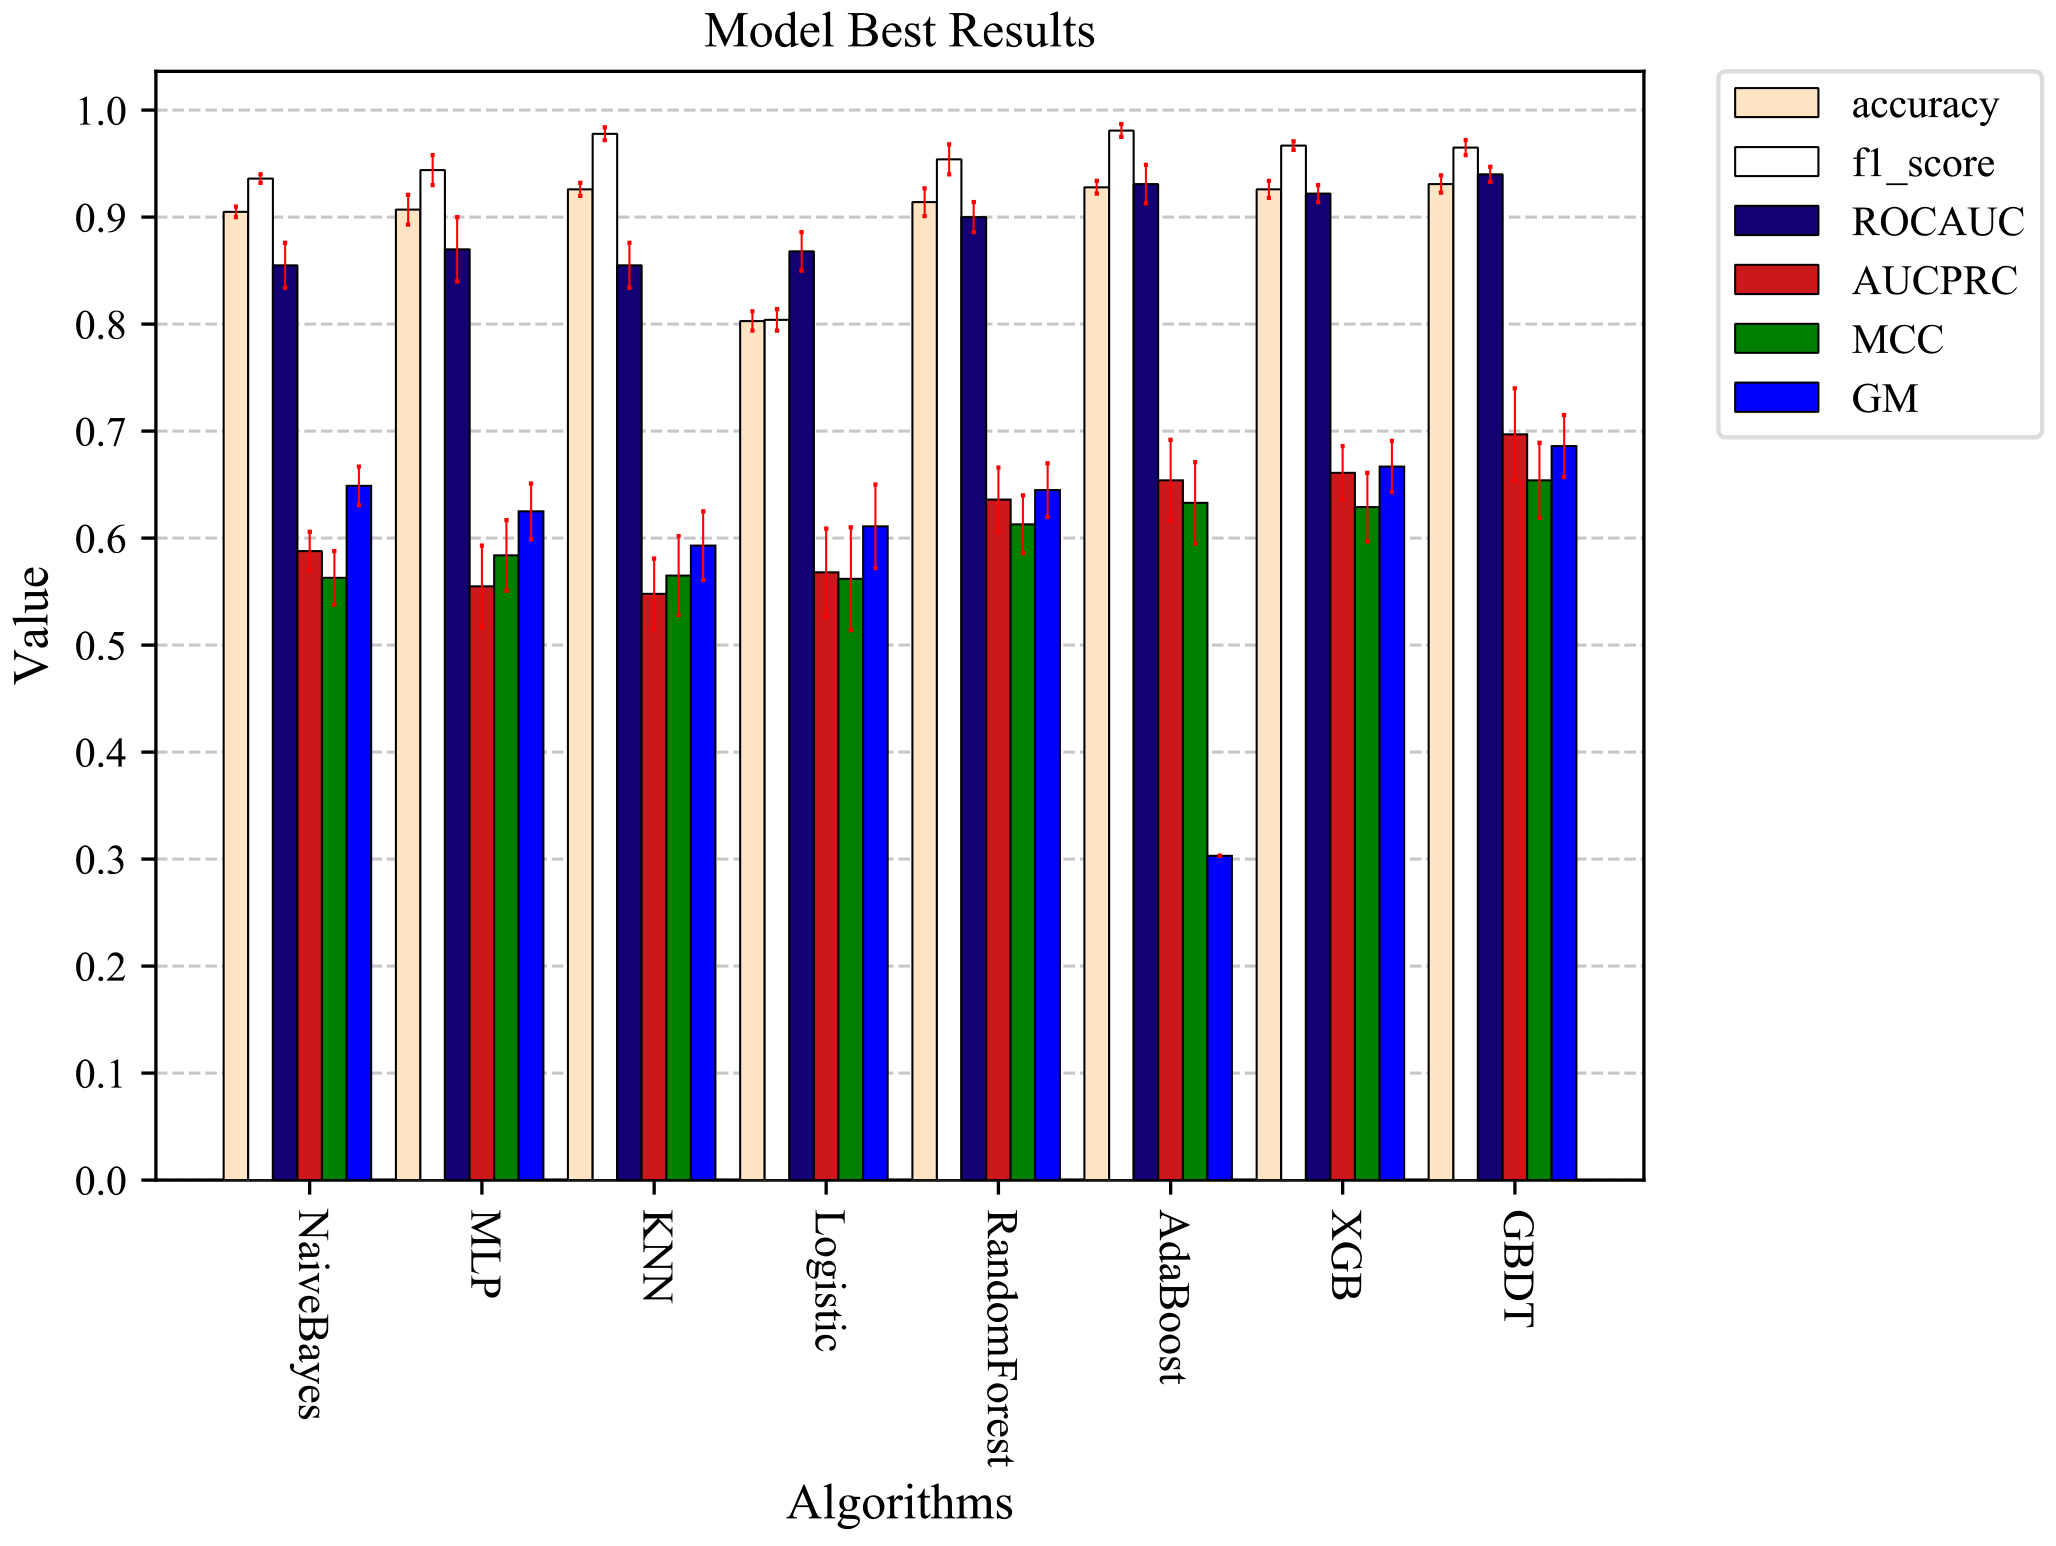 The optimal prediction results were obtained by each machine learning model trained using sampled processed data.